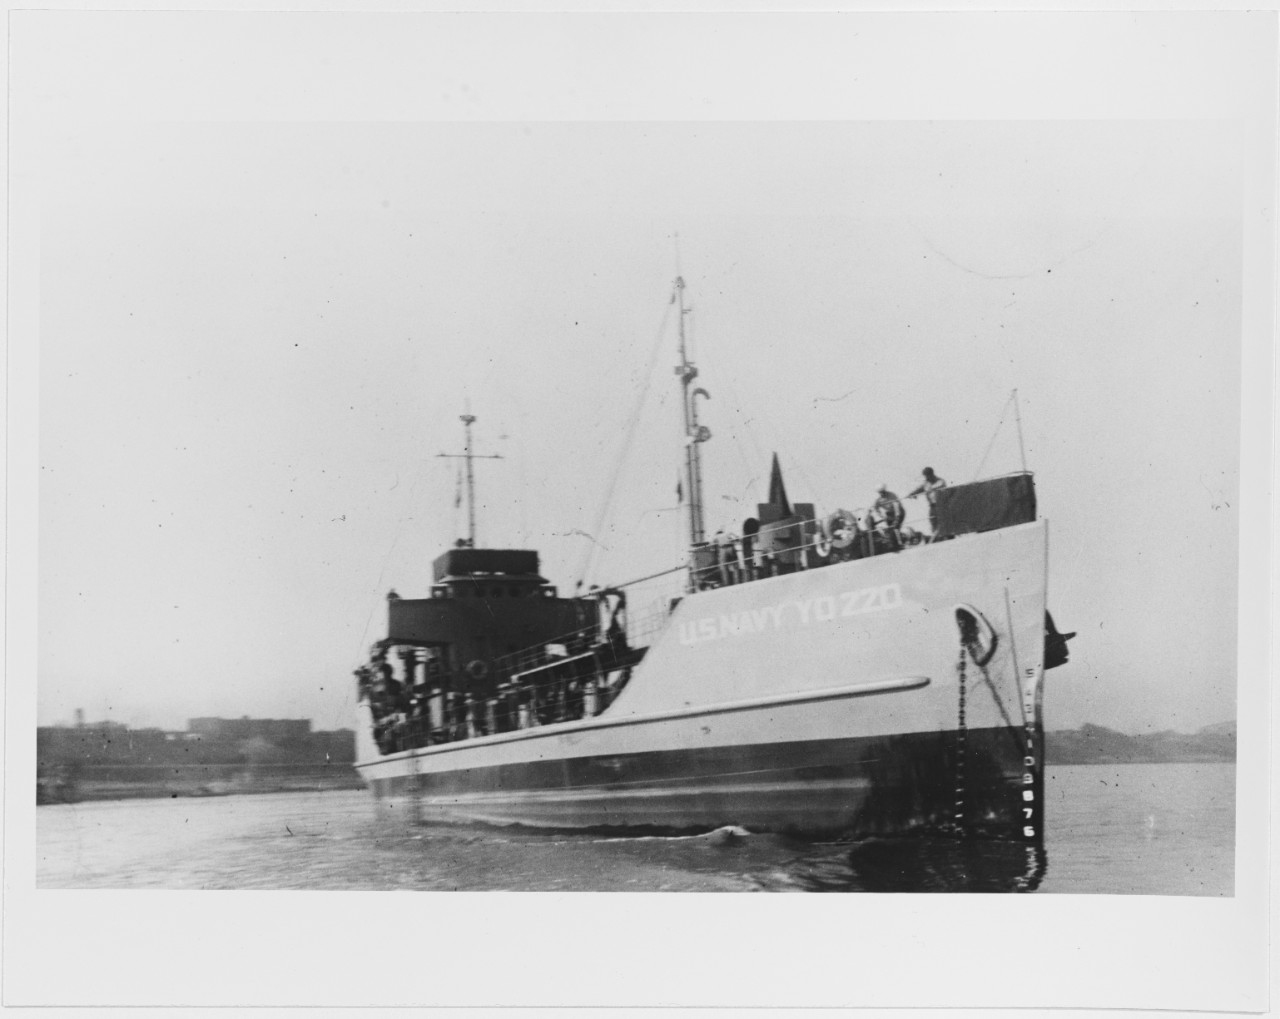 USS YO-220 off Memphis, Tennessee, on August 25, 1945